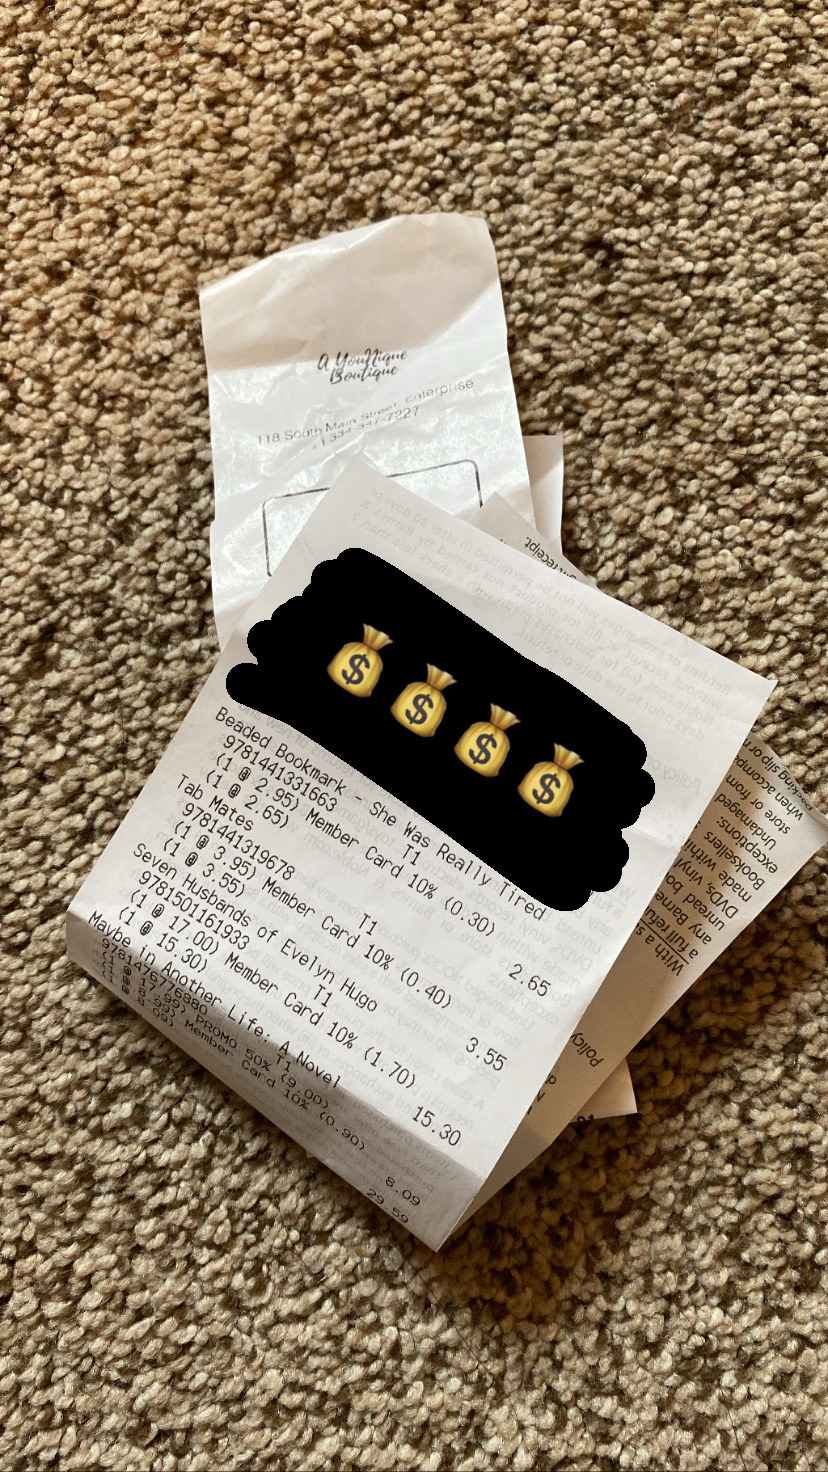 Folded receipts in a pile on a carpet marked up